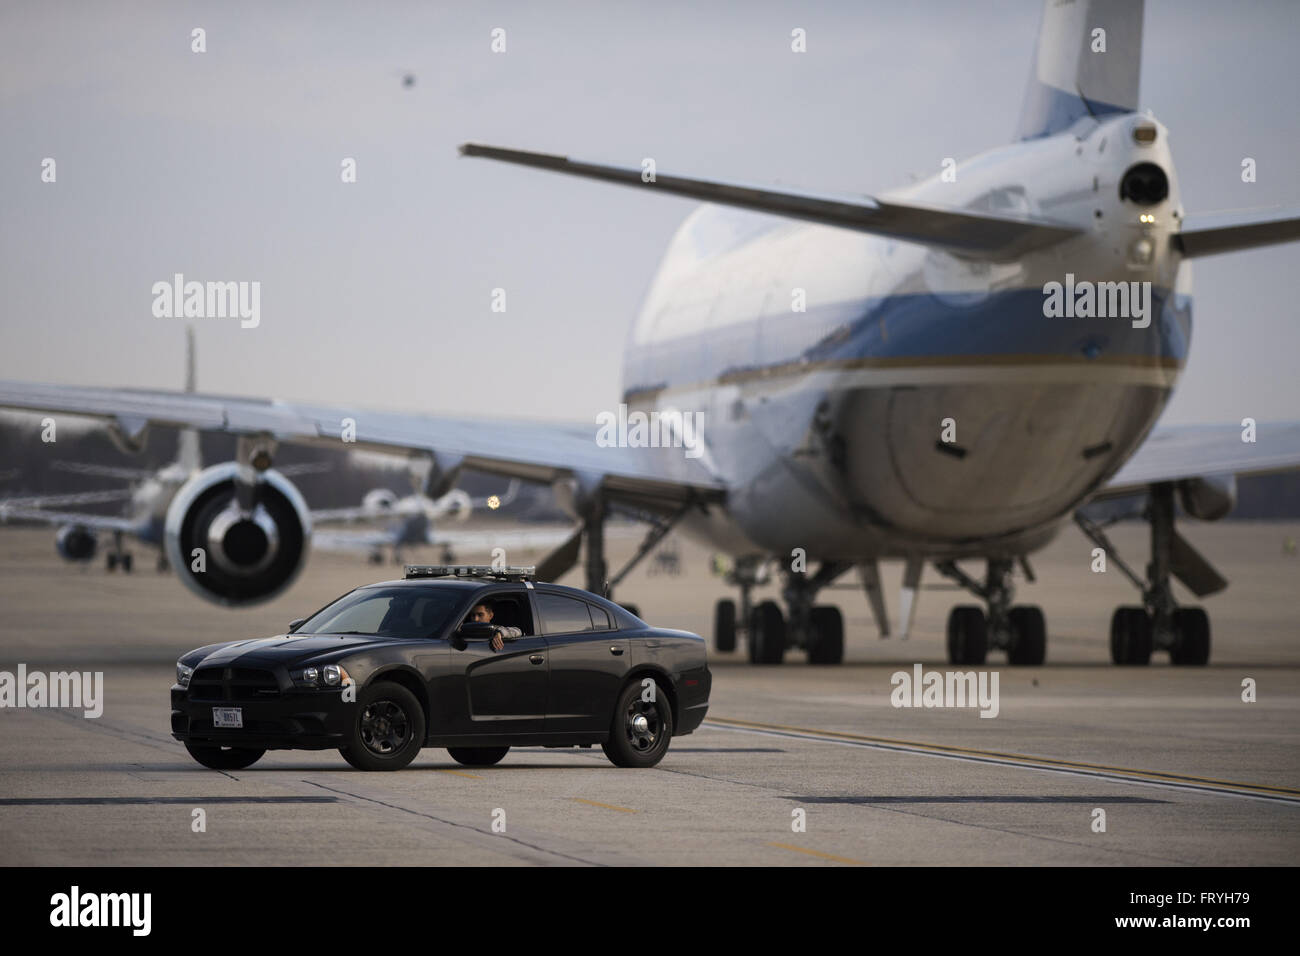 Joint Base Andrews, Maryland, USA. 25th Mar, 2016. A military police officer sits in his car on the tarmac after Air Force One arrived, with United States President Barack Obama aboard, at Joint Base Andrews, Maryland, USA, 25 March 2016. President Obama returned on the over night flight from his trip to Cuba and Argentina.Credit: Shawn Thew/Pool via CNP Credit:  Shawn Thew/CNP/ZUMA Wire/Alamy Live News Stock Photo